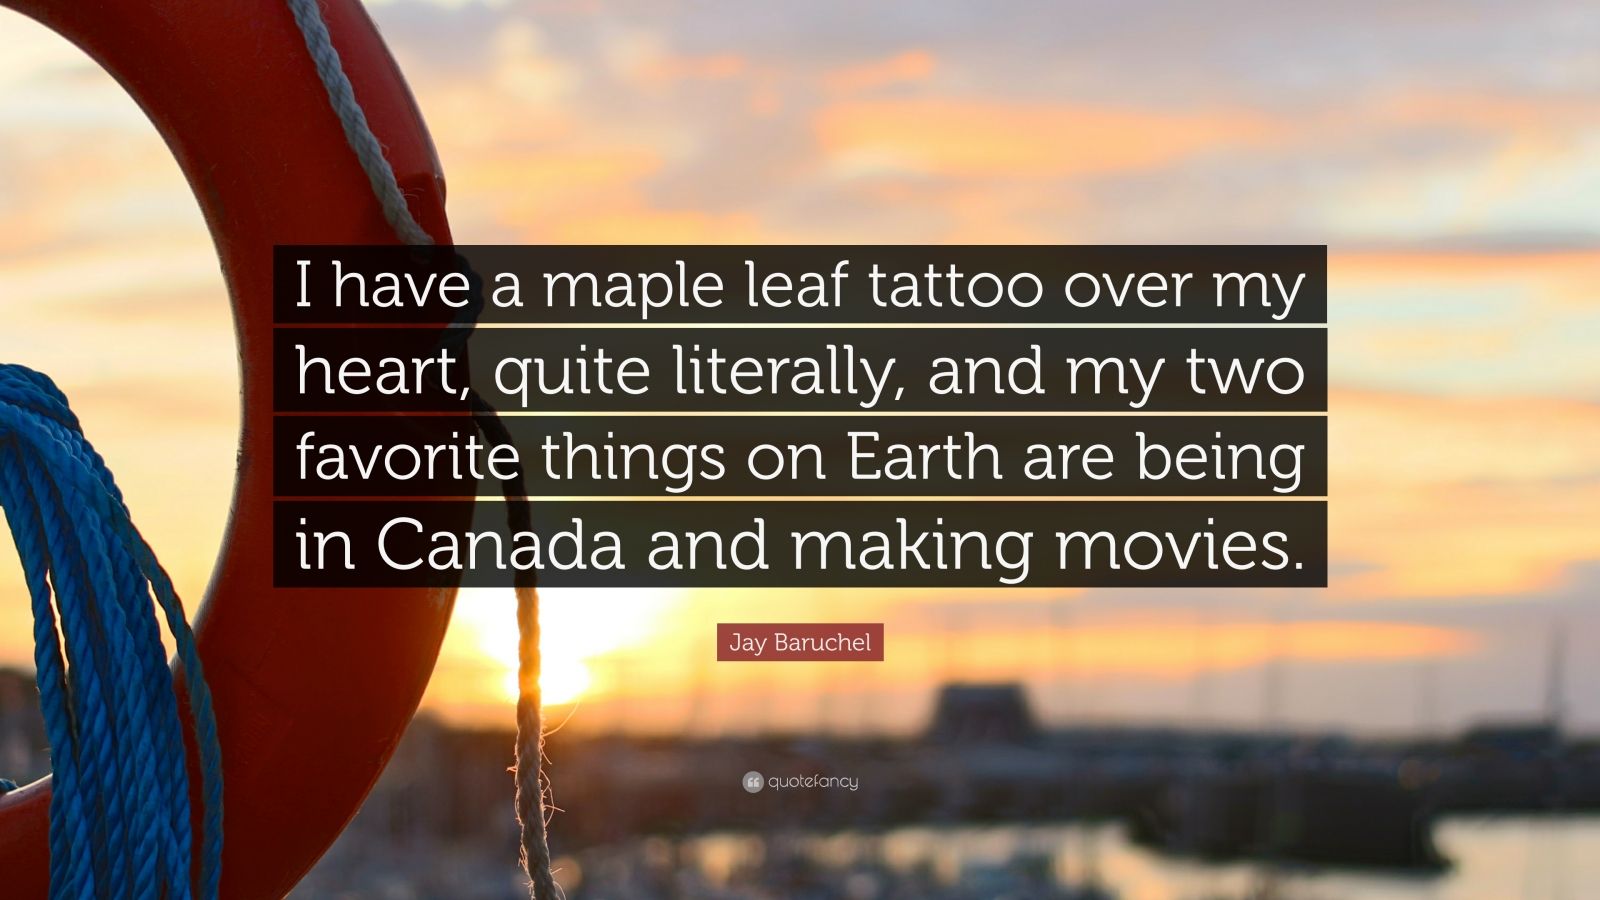 Jay Baruchel Quote: “I have a maple leaf tattoo over my heart, quite